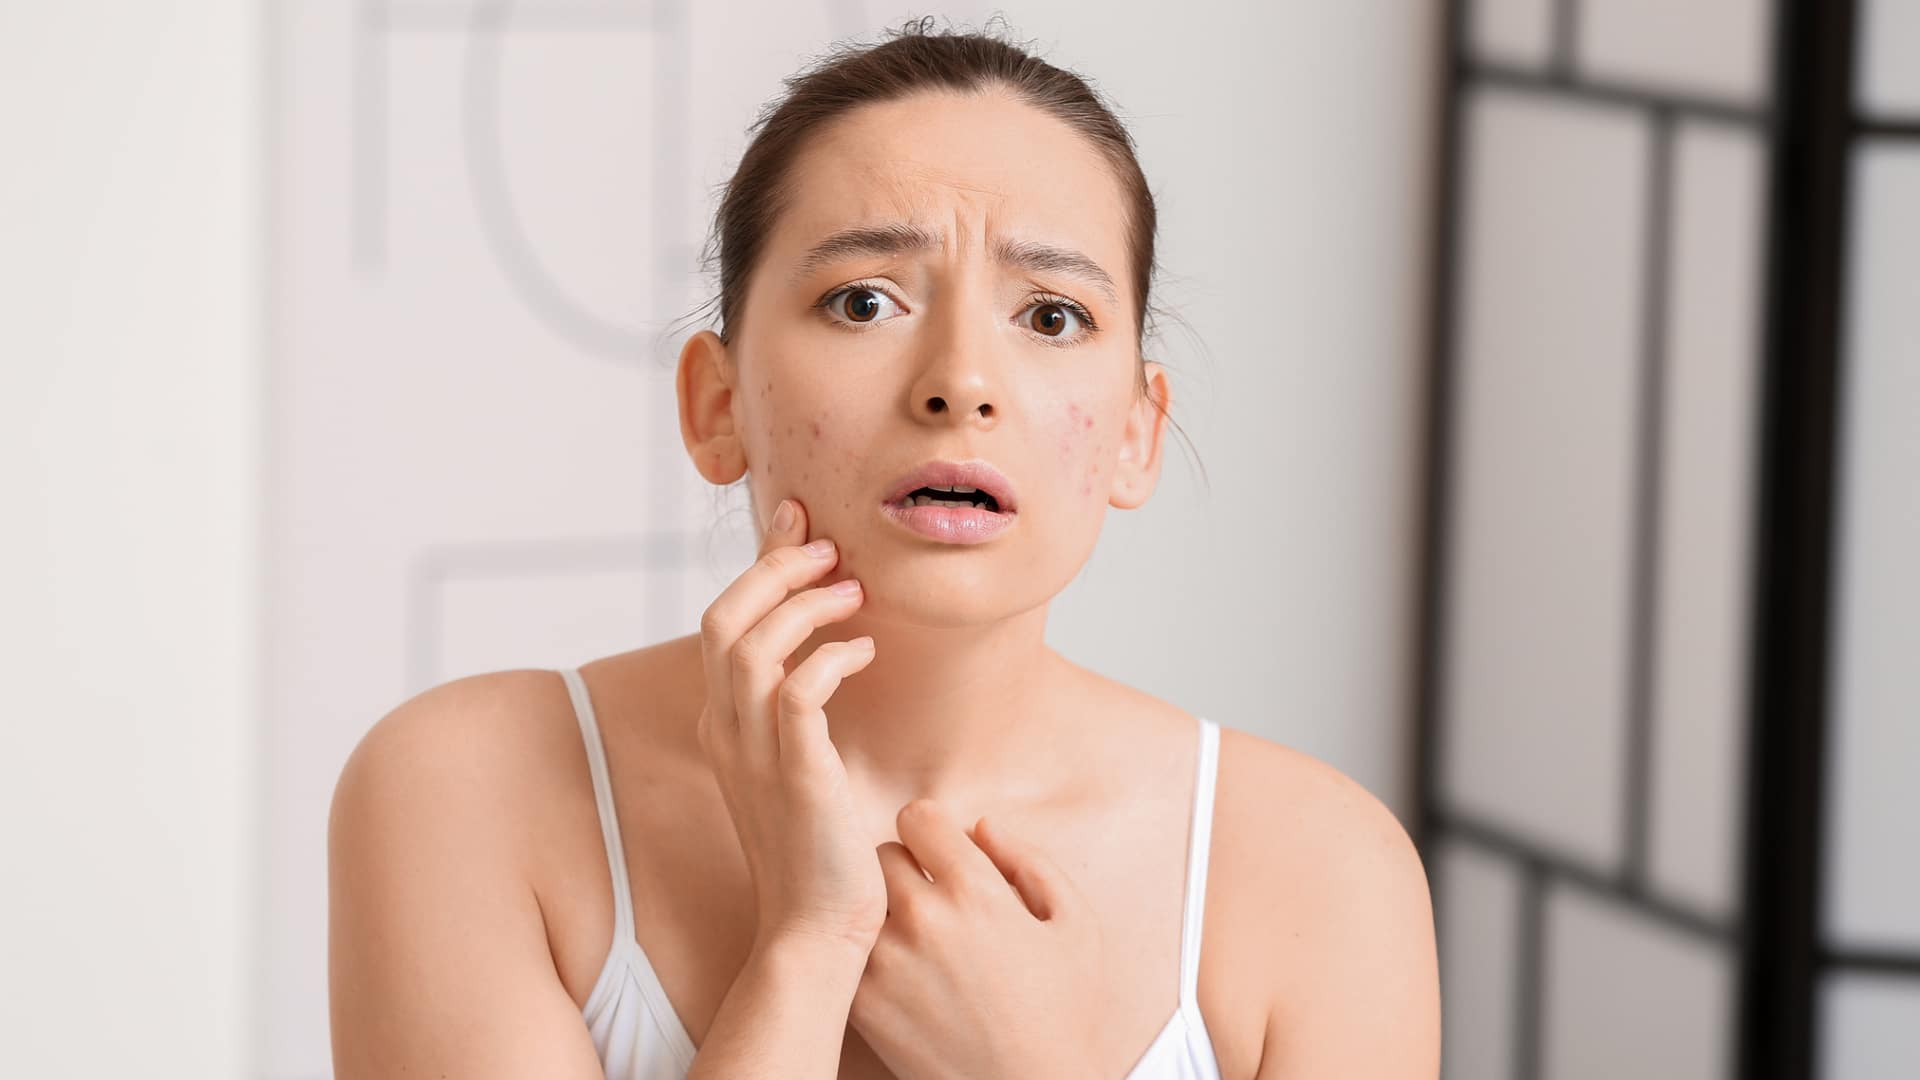 What Are the Signs of Skin Congestion? And How to Treat It